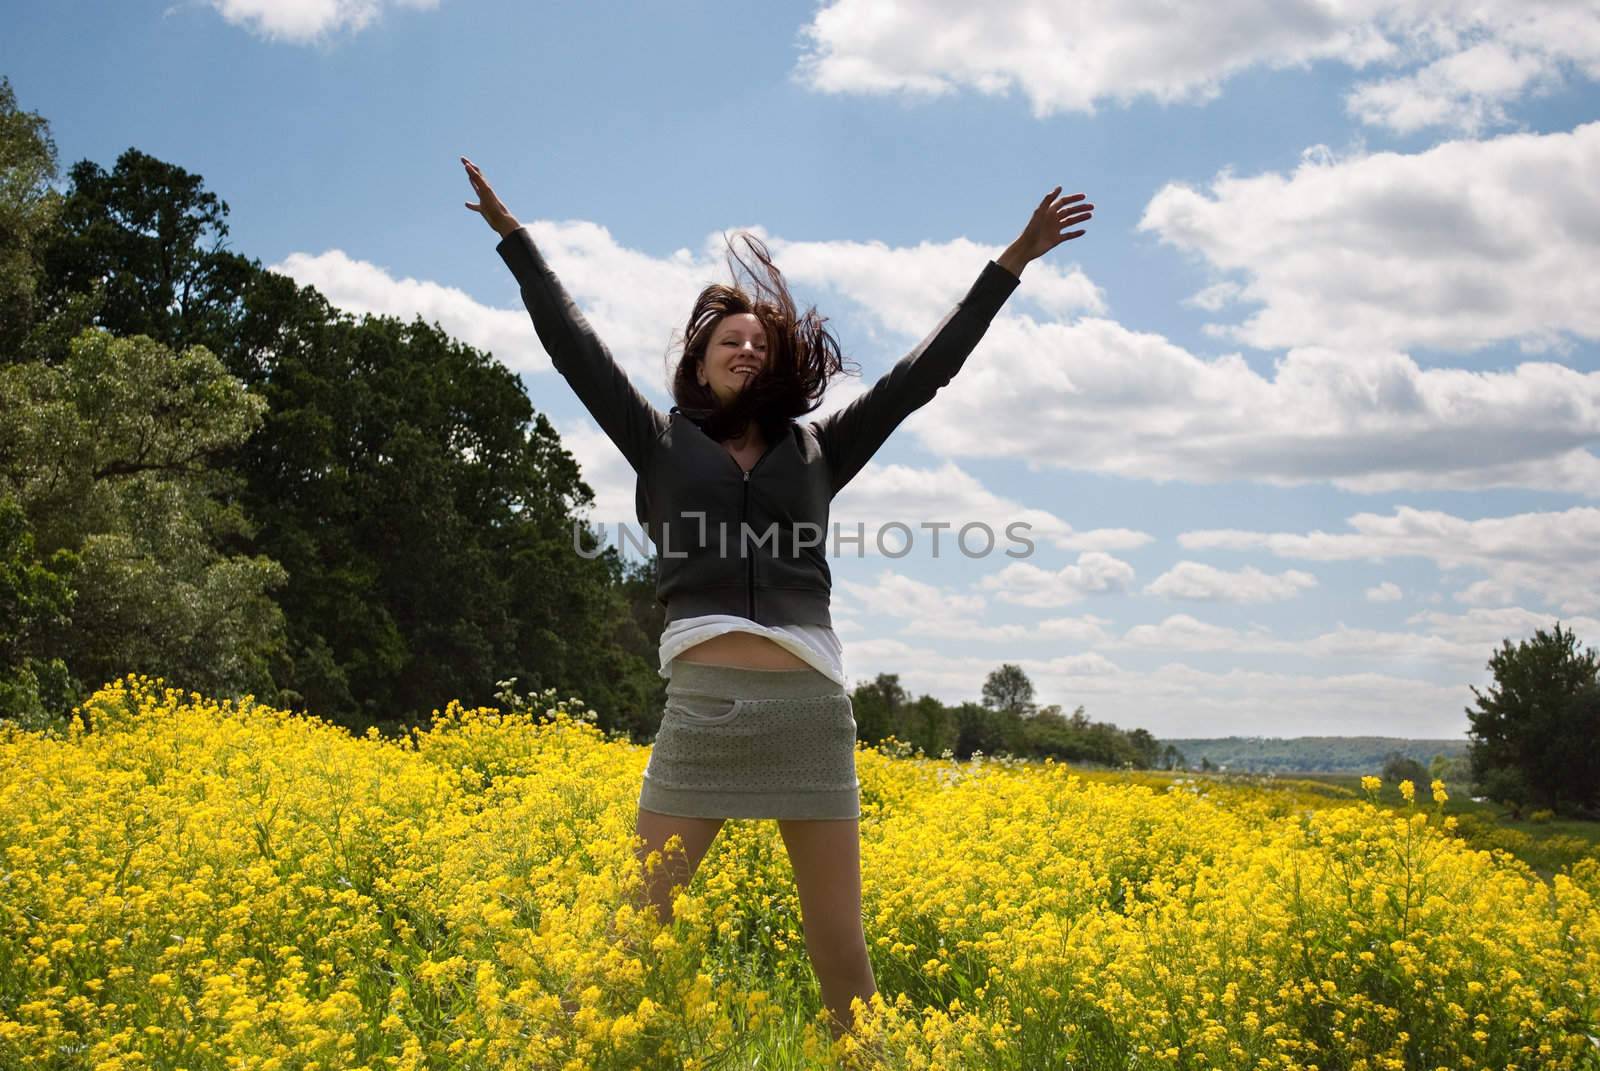 The happy girl jumps in the field of yellow flowers by Diversphoto